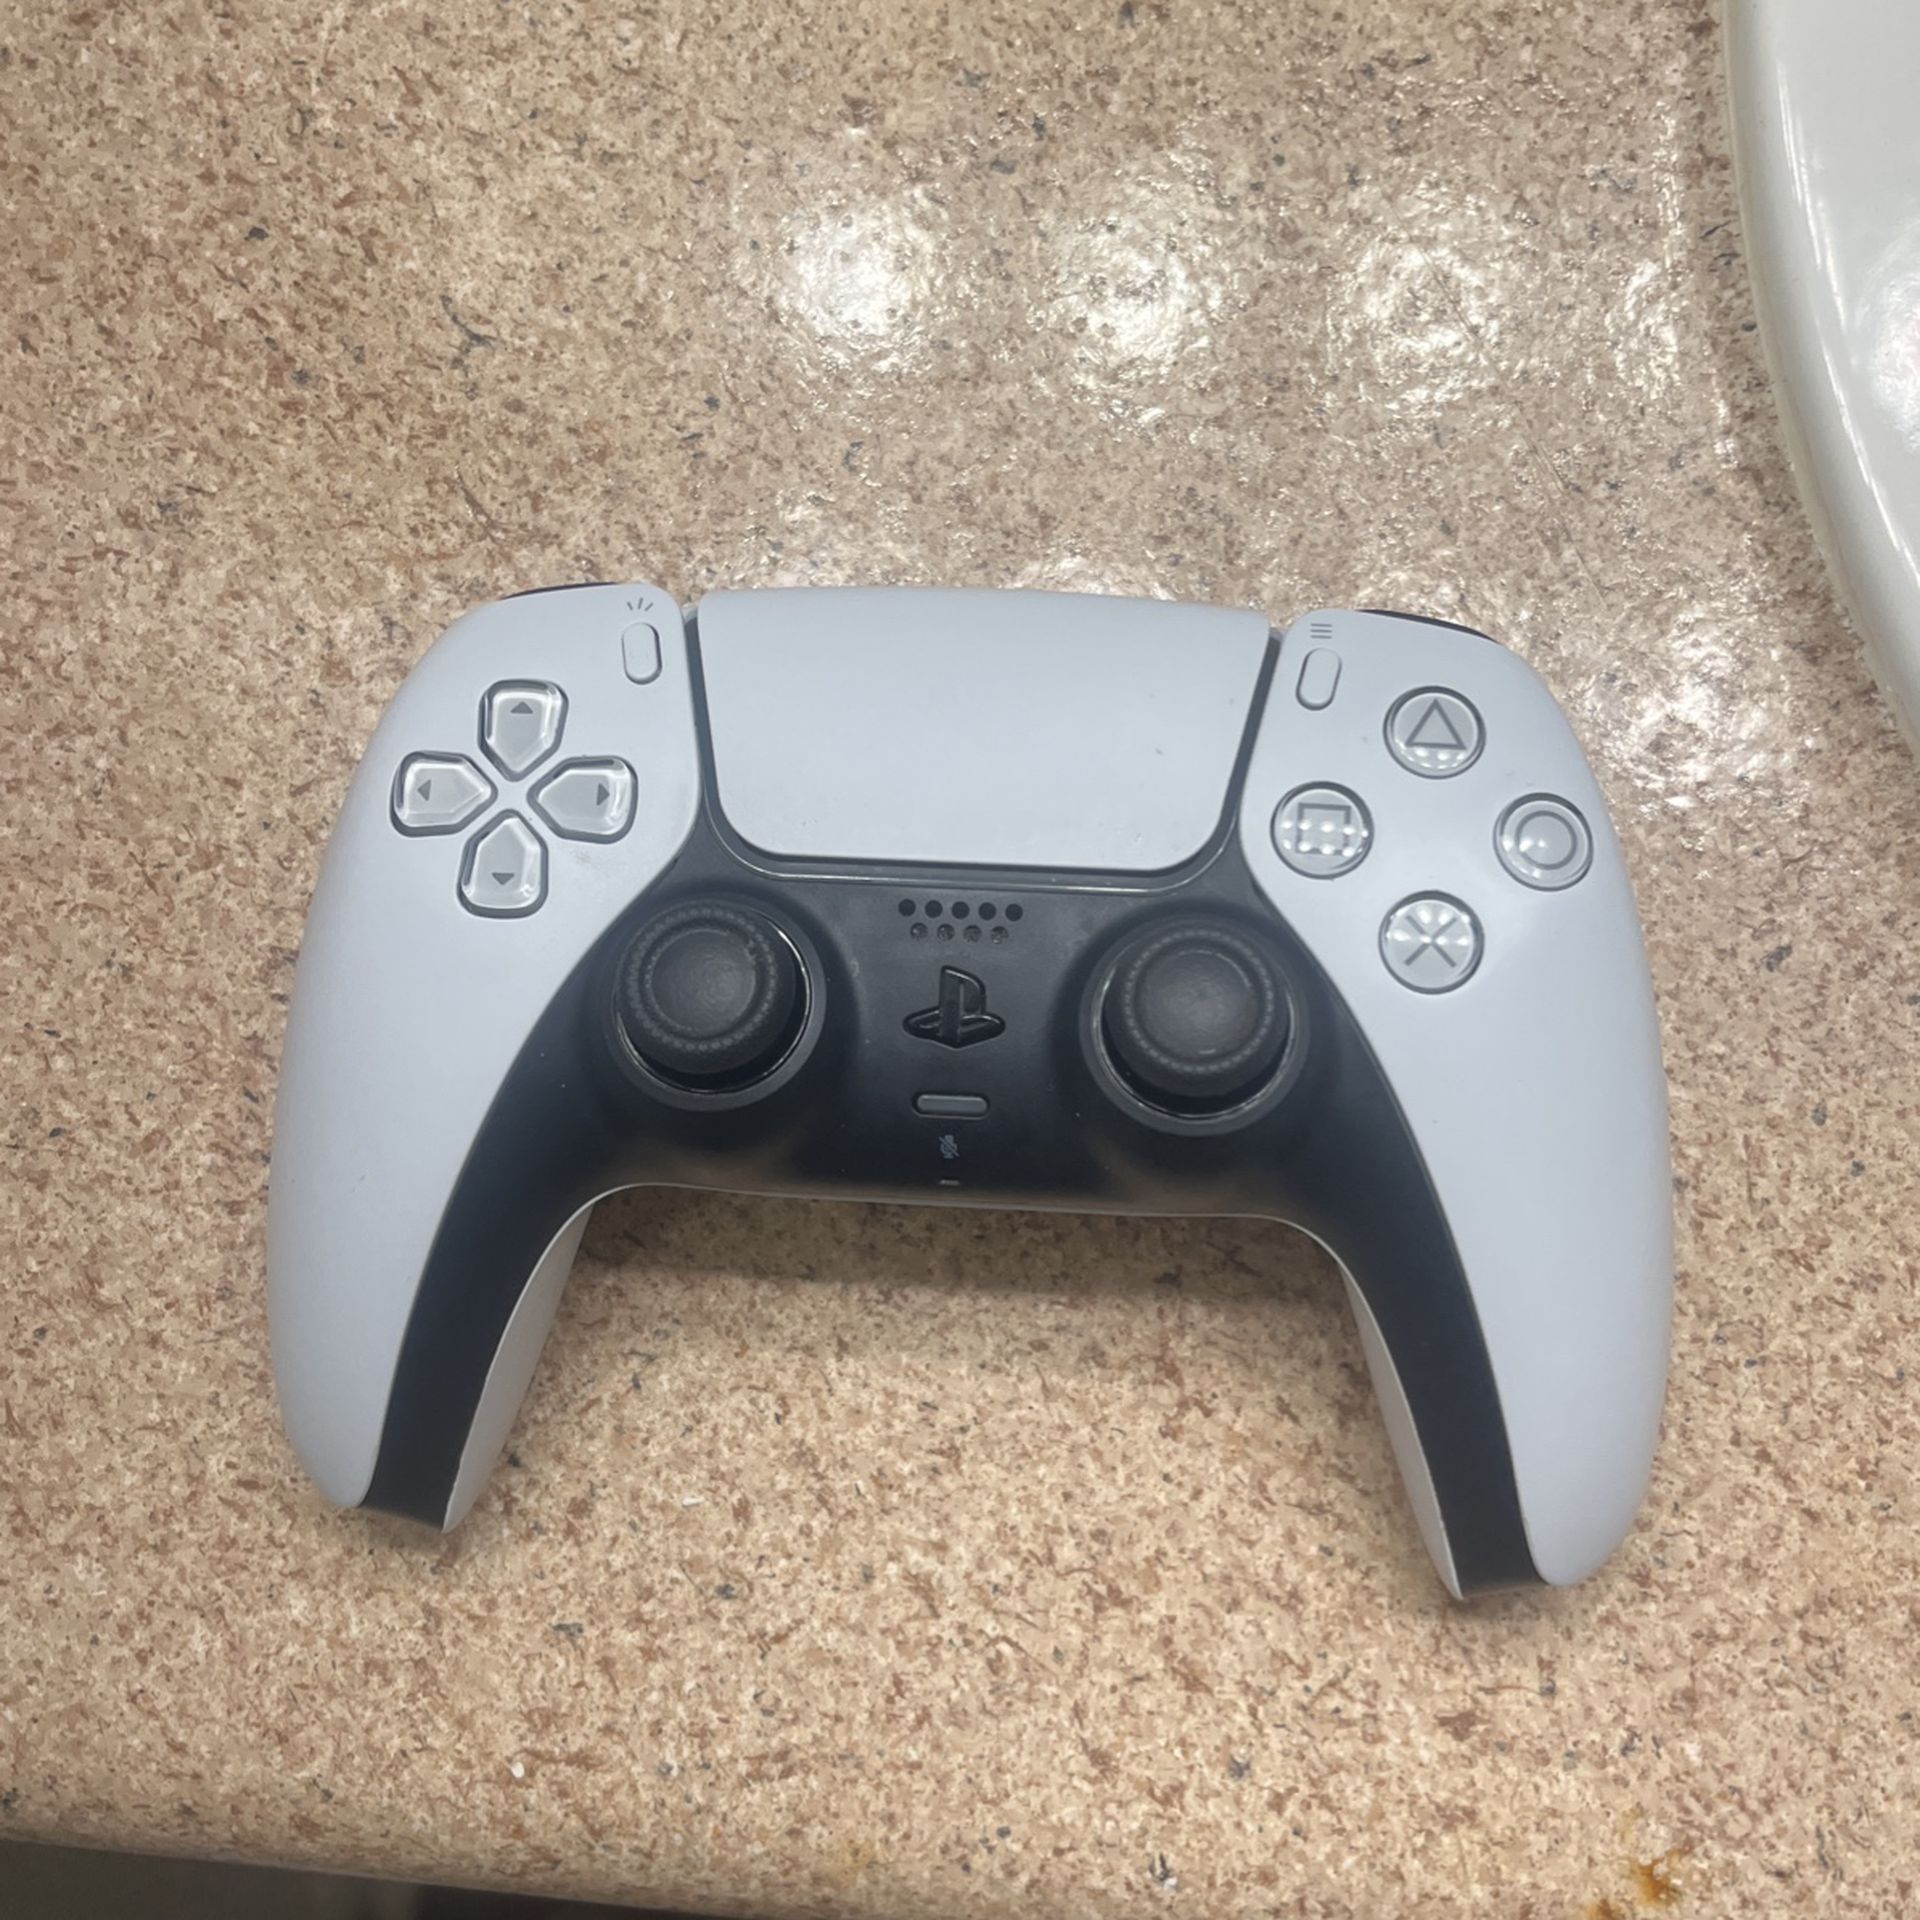 Ps5 Controller Used 